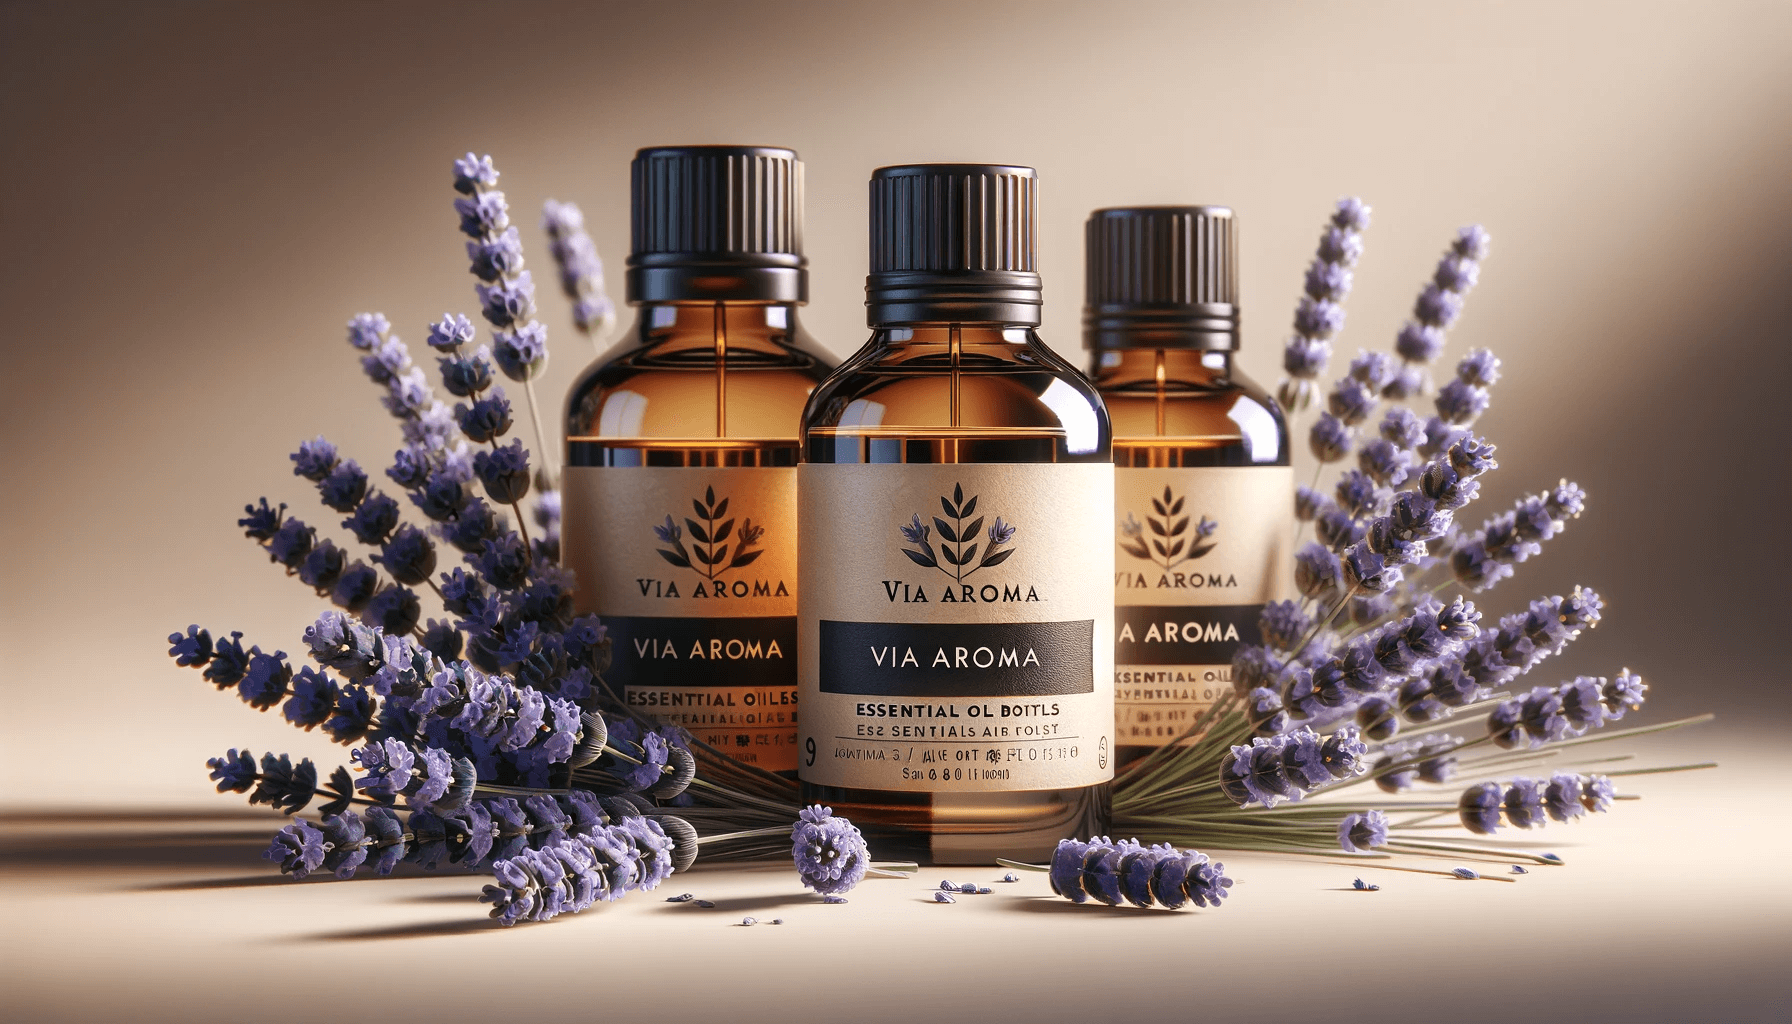 DALL·E 2024 01 18 14.00.27 Create a photorealistic image that shows a collection of essential oil bottles on a neutral background. The bottles are branded with Via Aroma clea